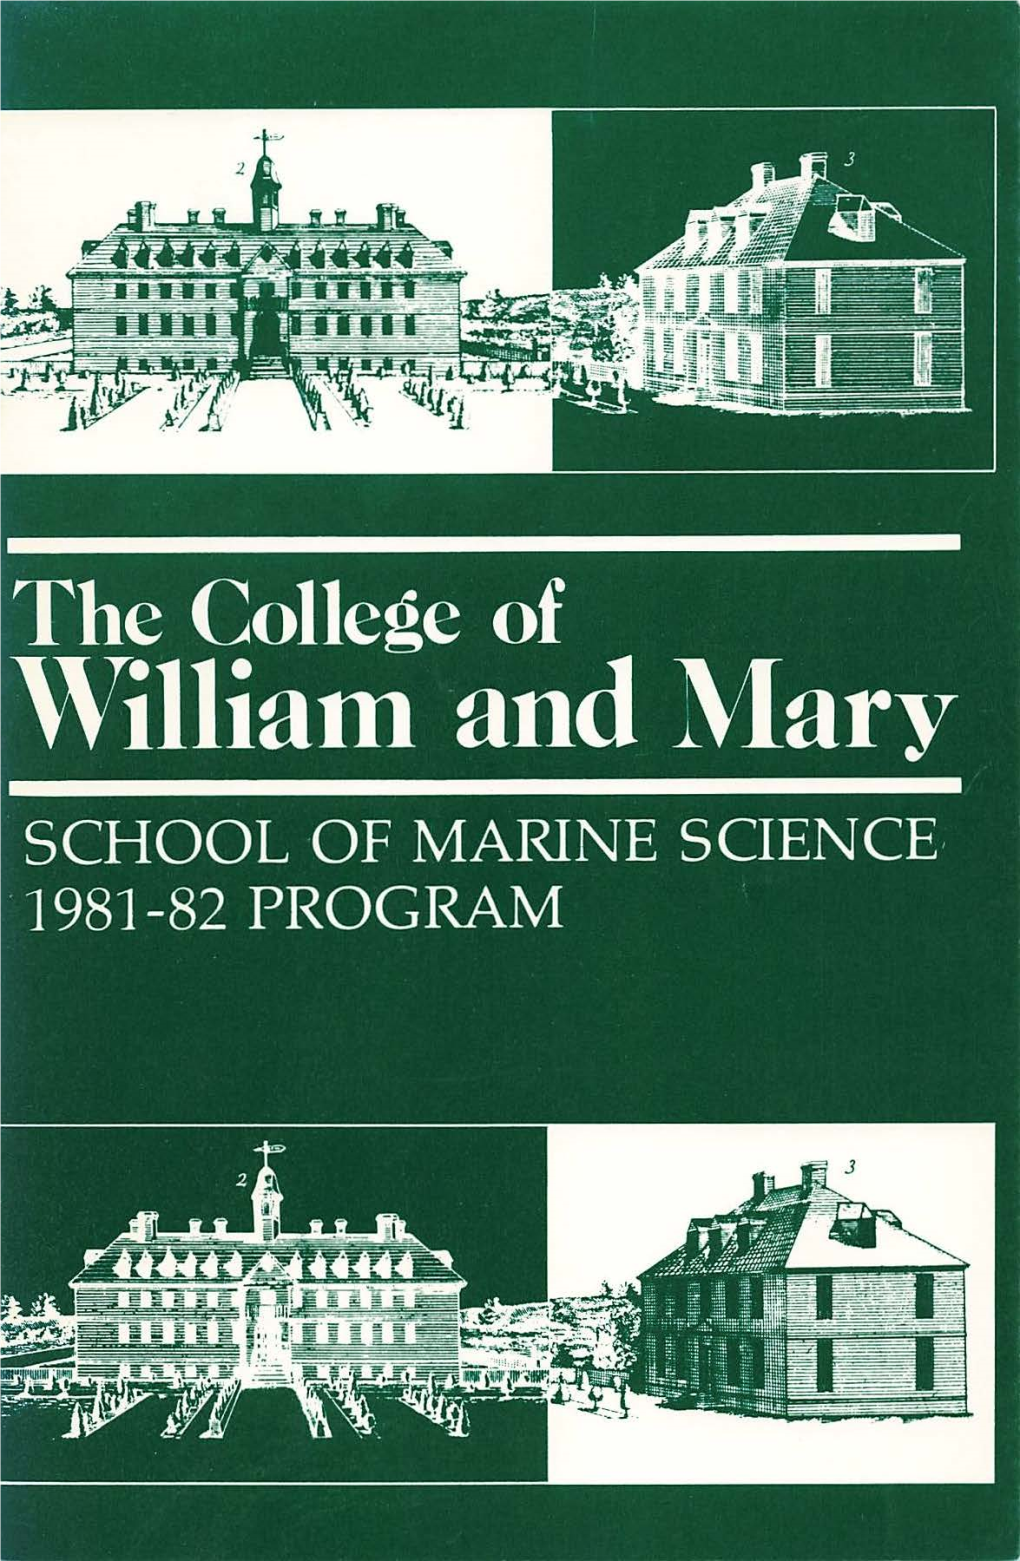 The College of William and Mary SCHOOL of MARINE SOENCE 1981-82 PROGRAM